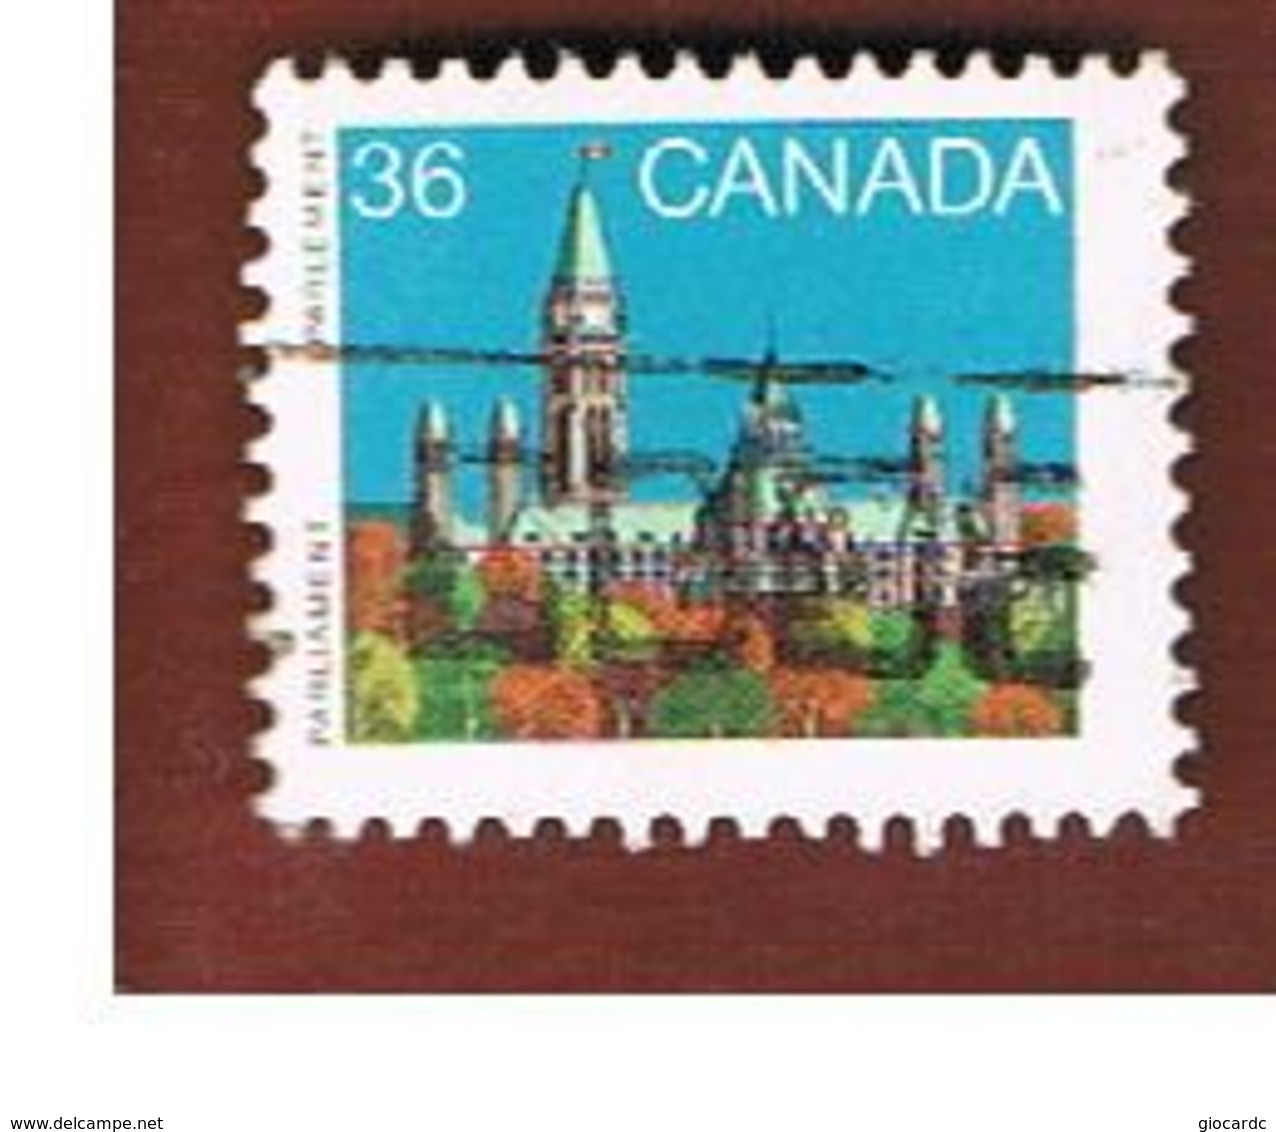 CANADA - SG 1156   - 1987 PARLIAMENT          -  USED - Used Stamps